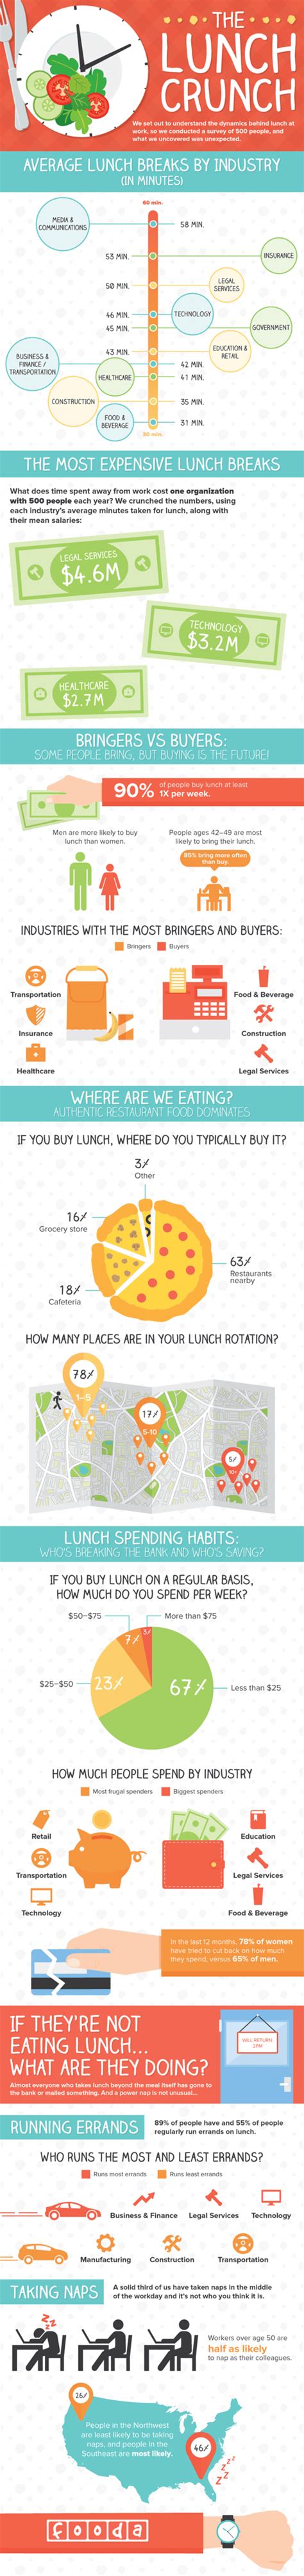 here s how 500 american workers spend their lunch breaks mental floss